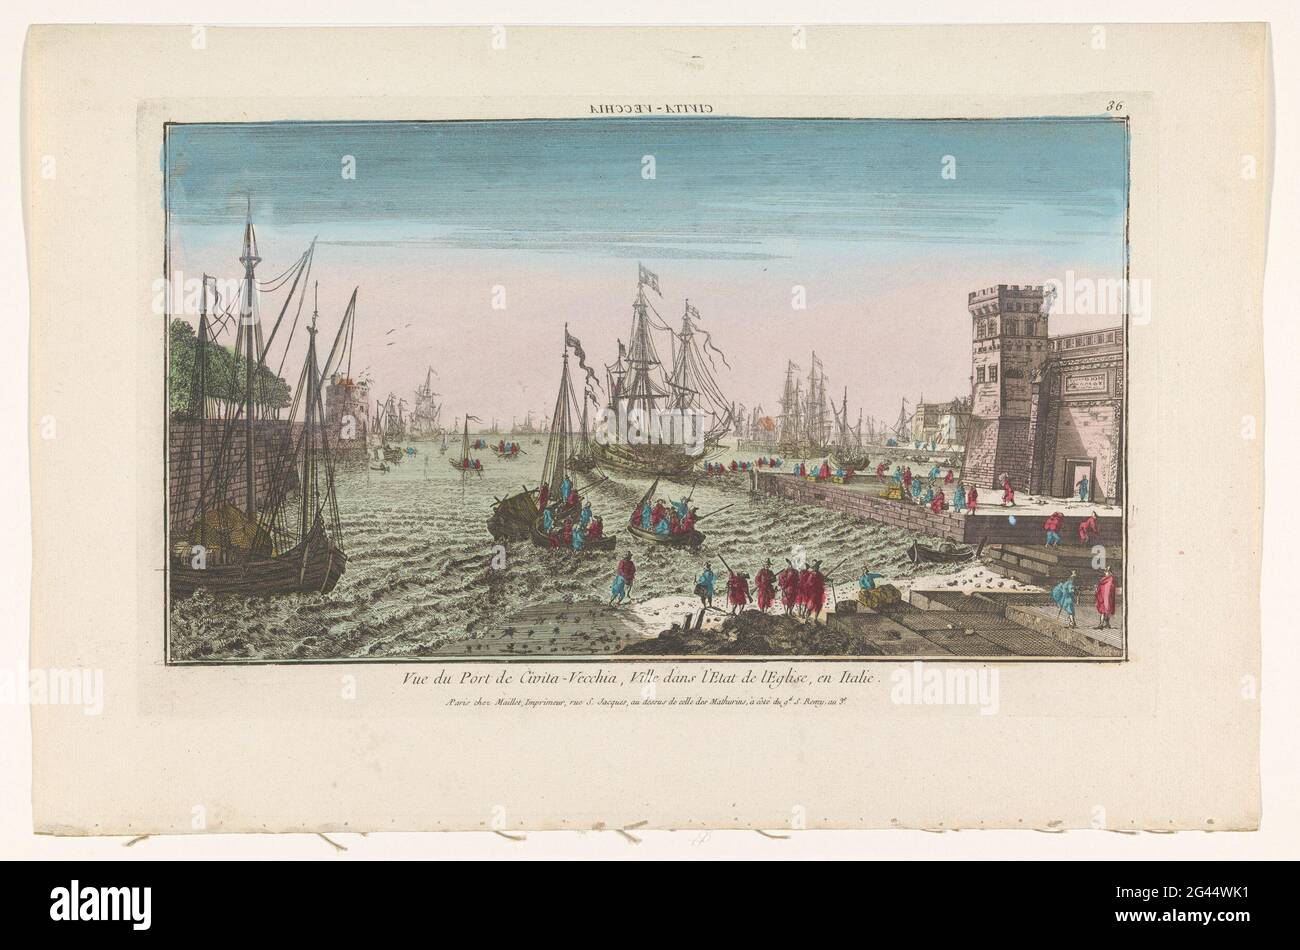 View of the harbor in Civitavecchia; Civita vecchia. There are ships and boats on the water. On the right is a strengthened structure and groups of figures with goods on the waterfront. Numbered: 36. Stock Photo